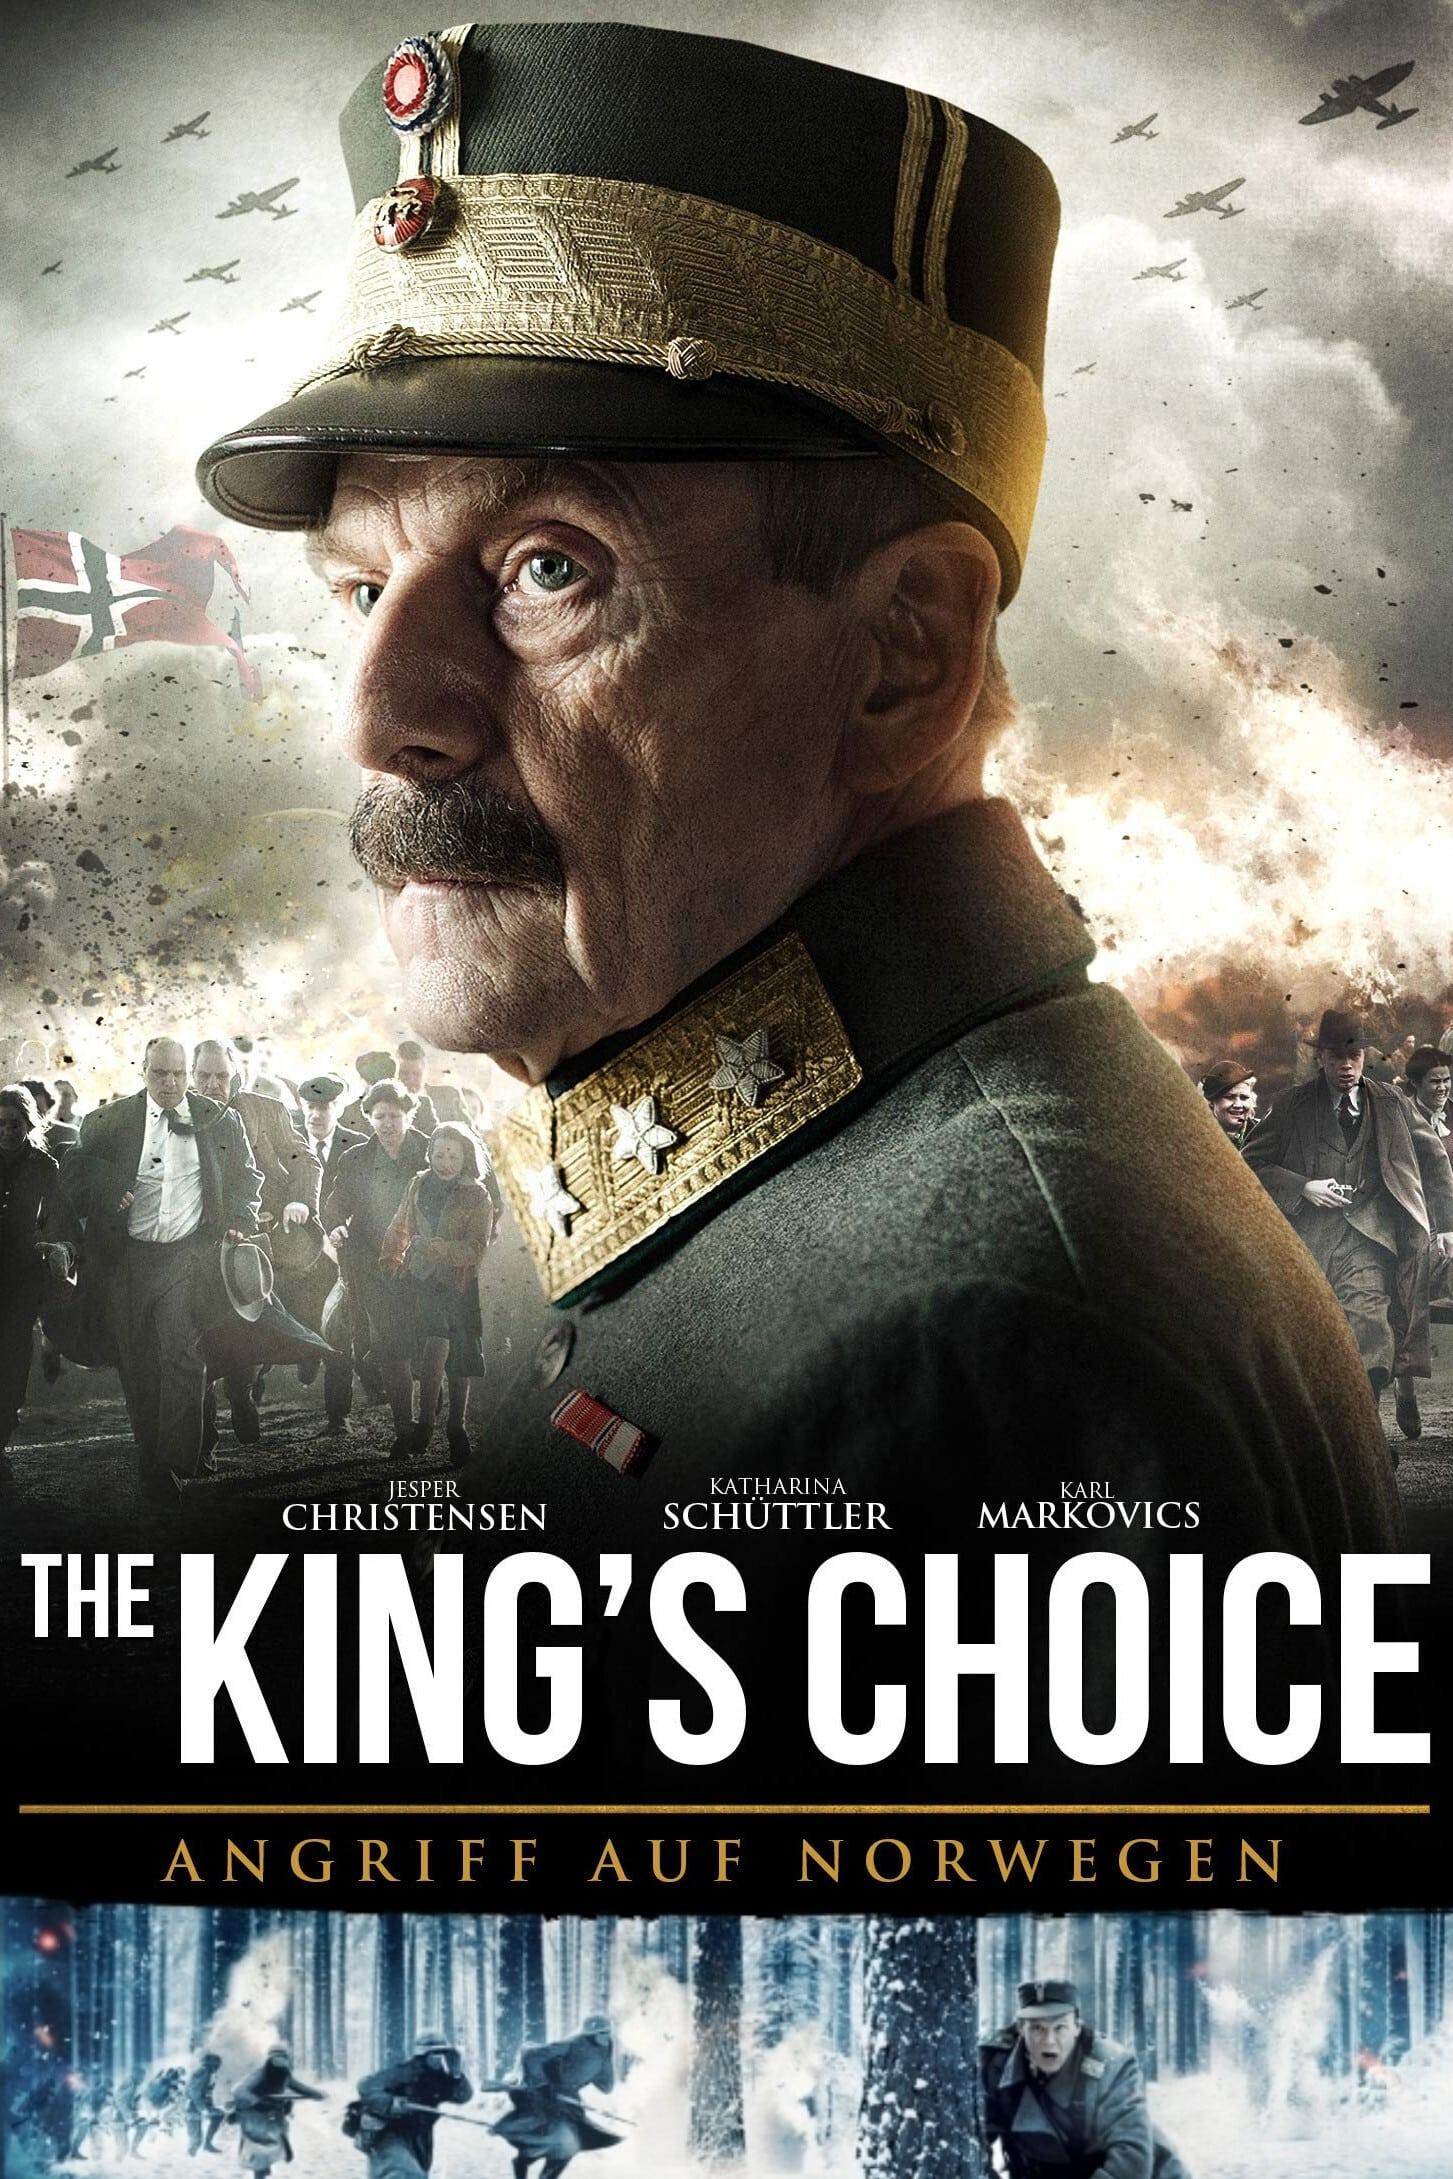 The King's Choice - Angriff auf Norwegen poster